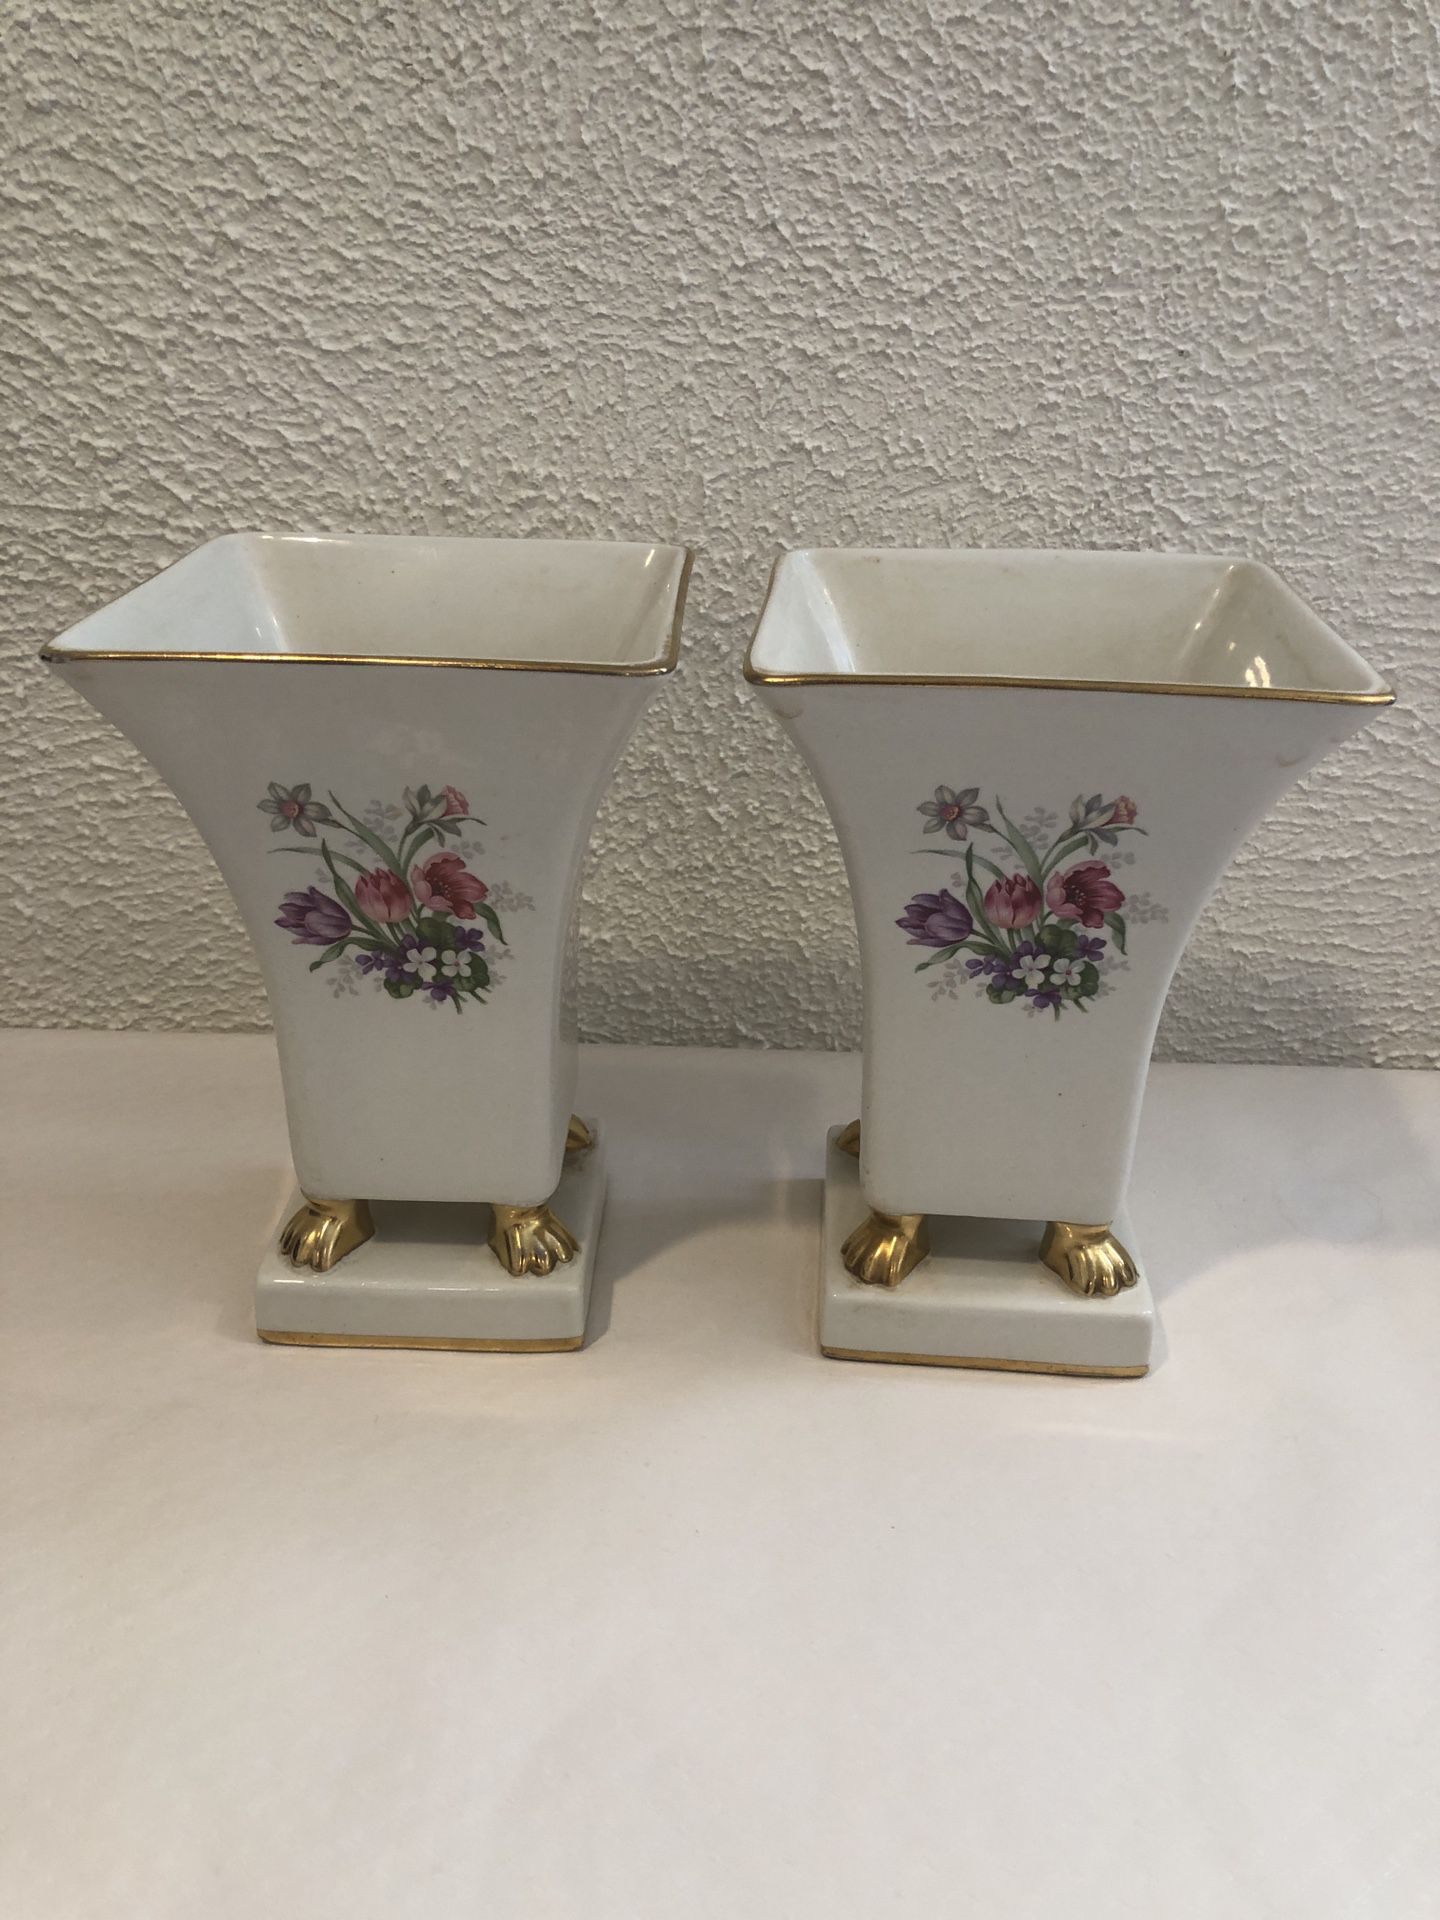 A Pair Of Vintage Trenton Art Potteries Floral Flower Gold Footed Square Mantel Vases 8” Tall 5.5” Wide Made In USA